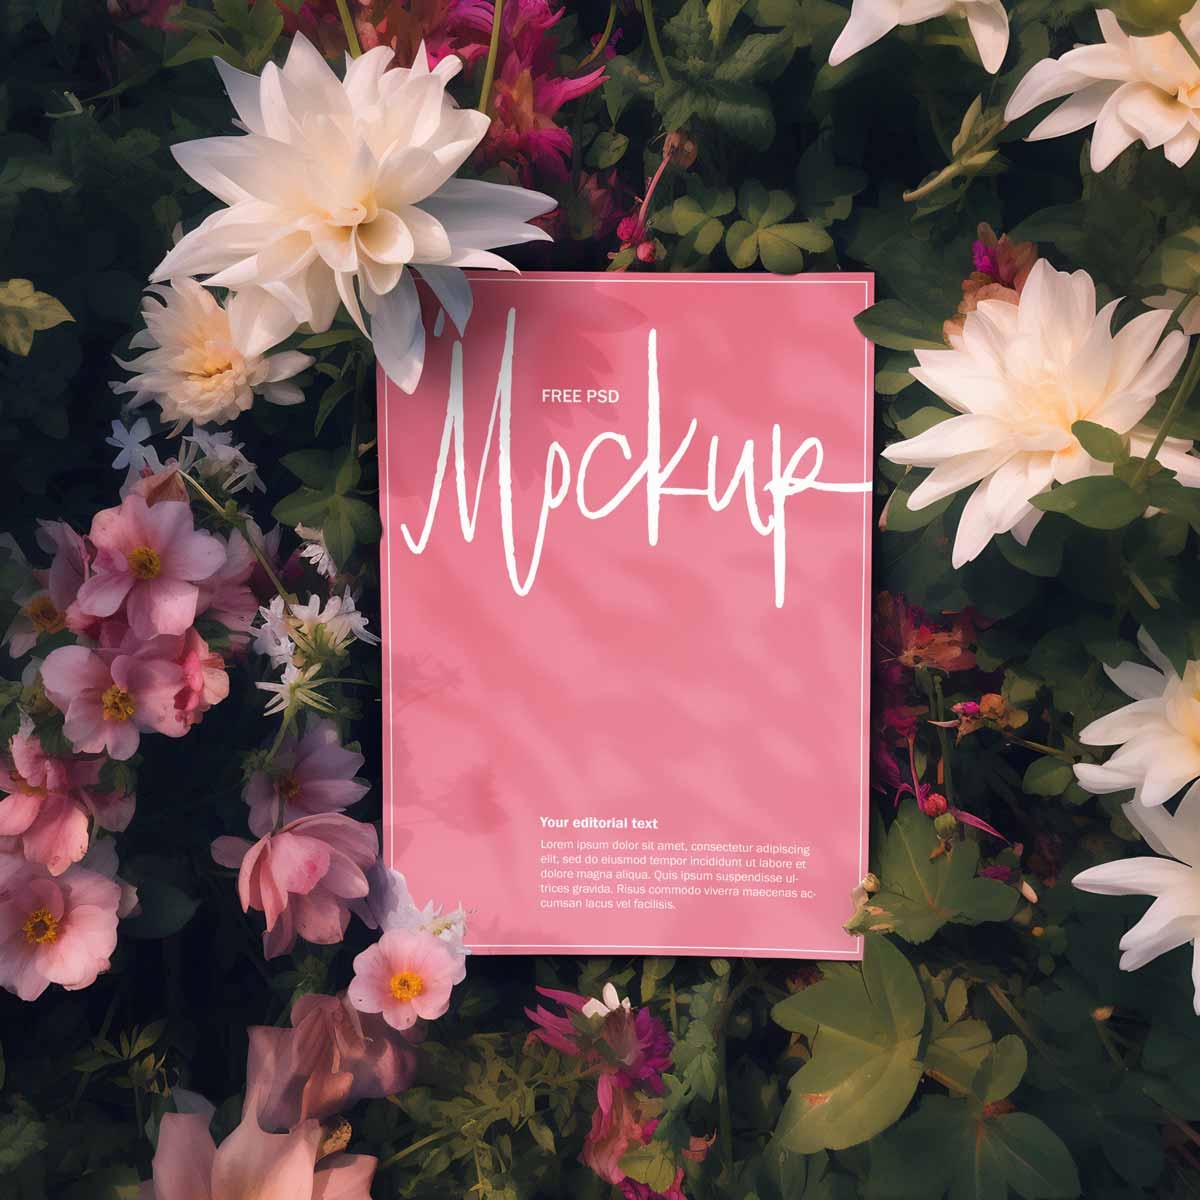 Free Poster in Flowers Mockup